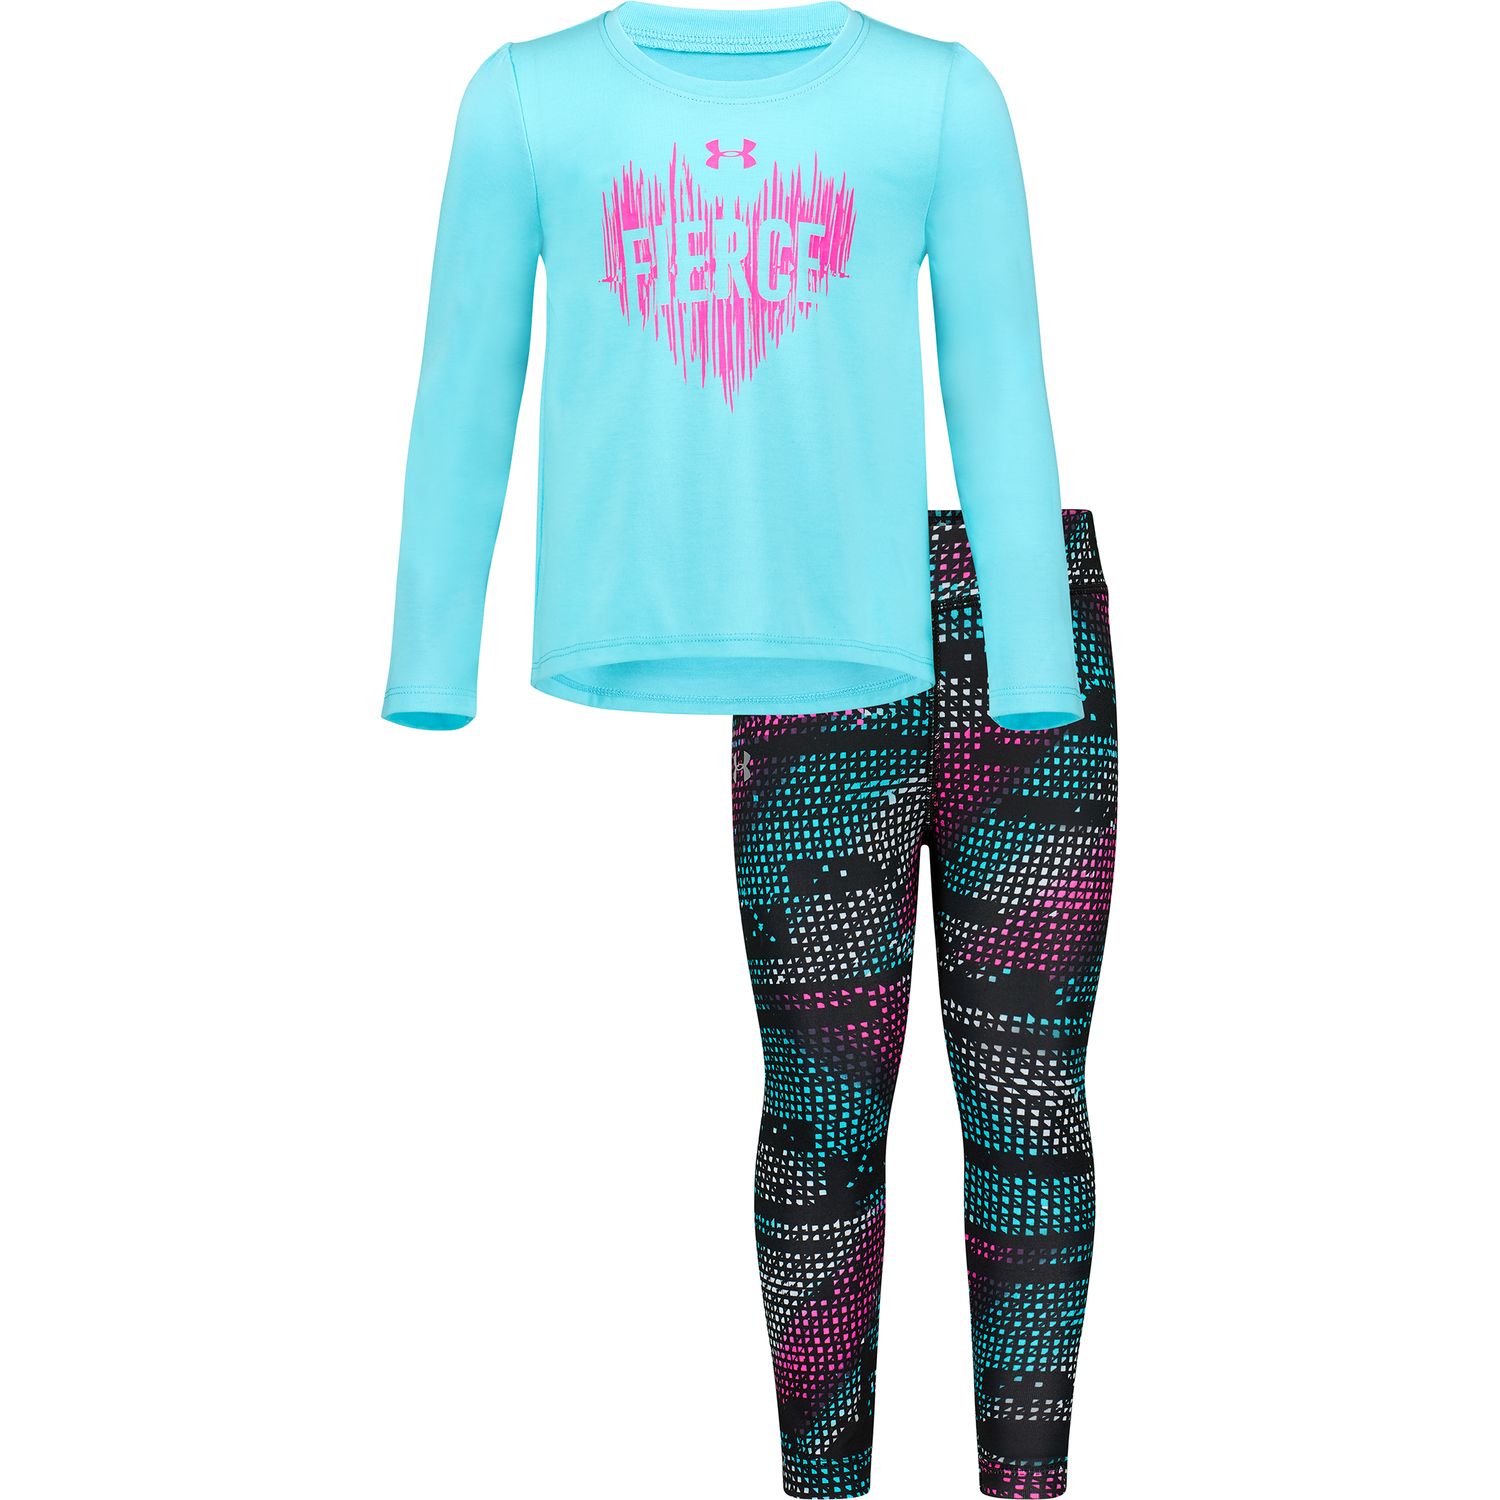 Girls Under Armour Clothing Sets 